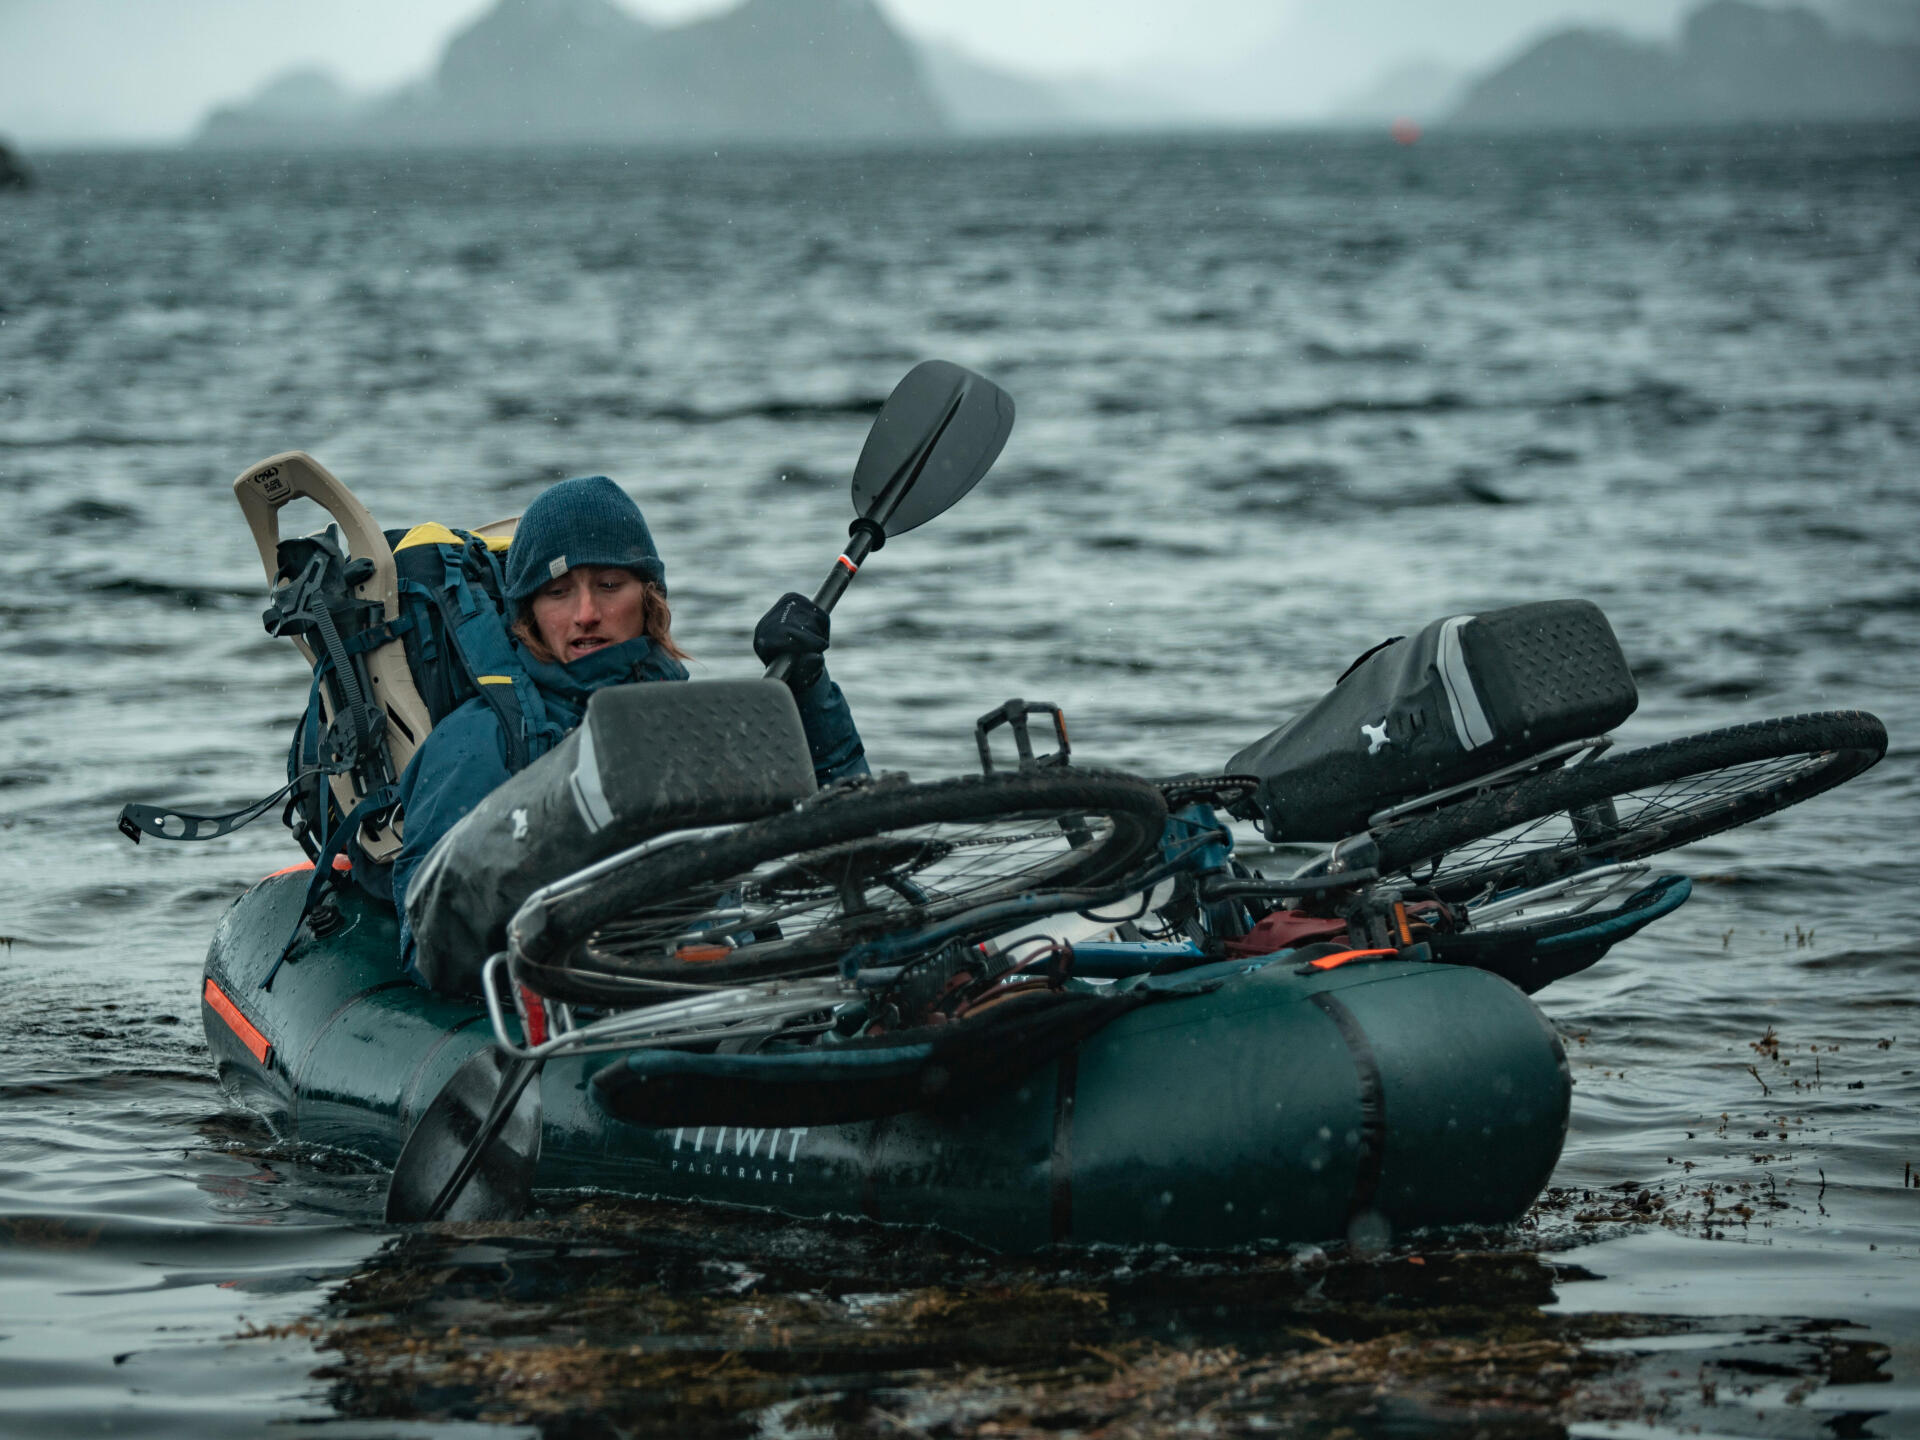 VAT BOLLE: an environmentally conscious cycling, packraft and snowboarding adventure film!